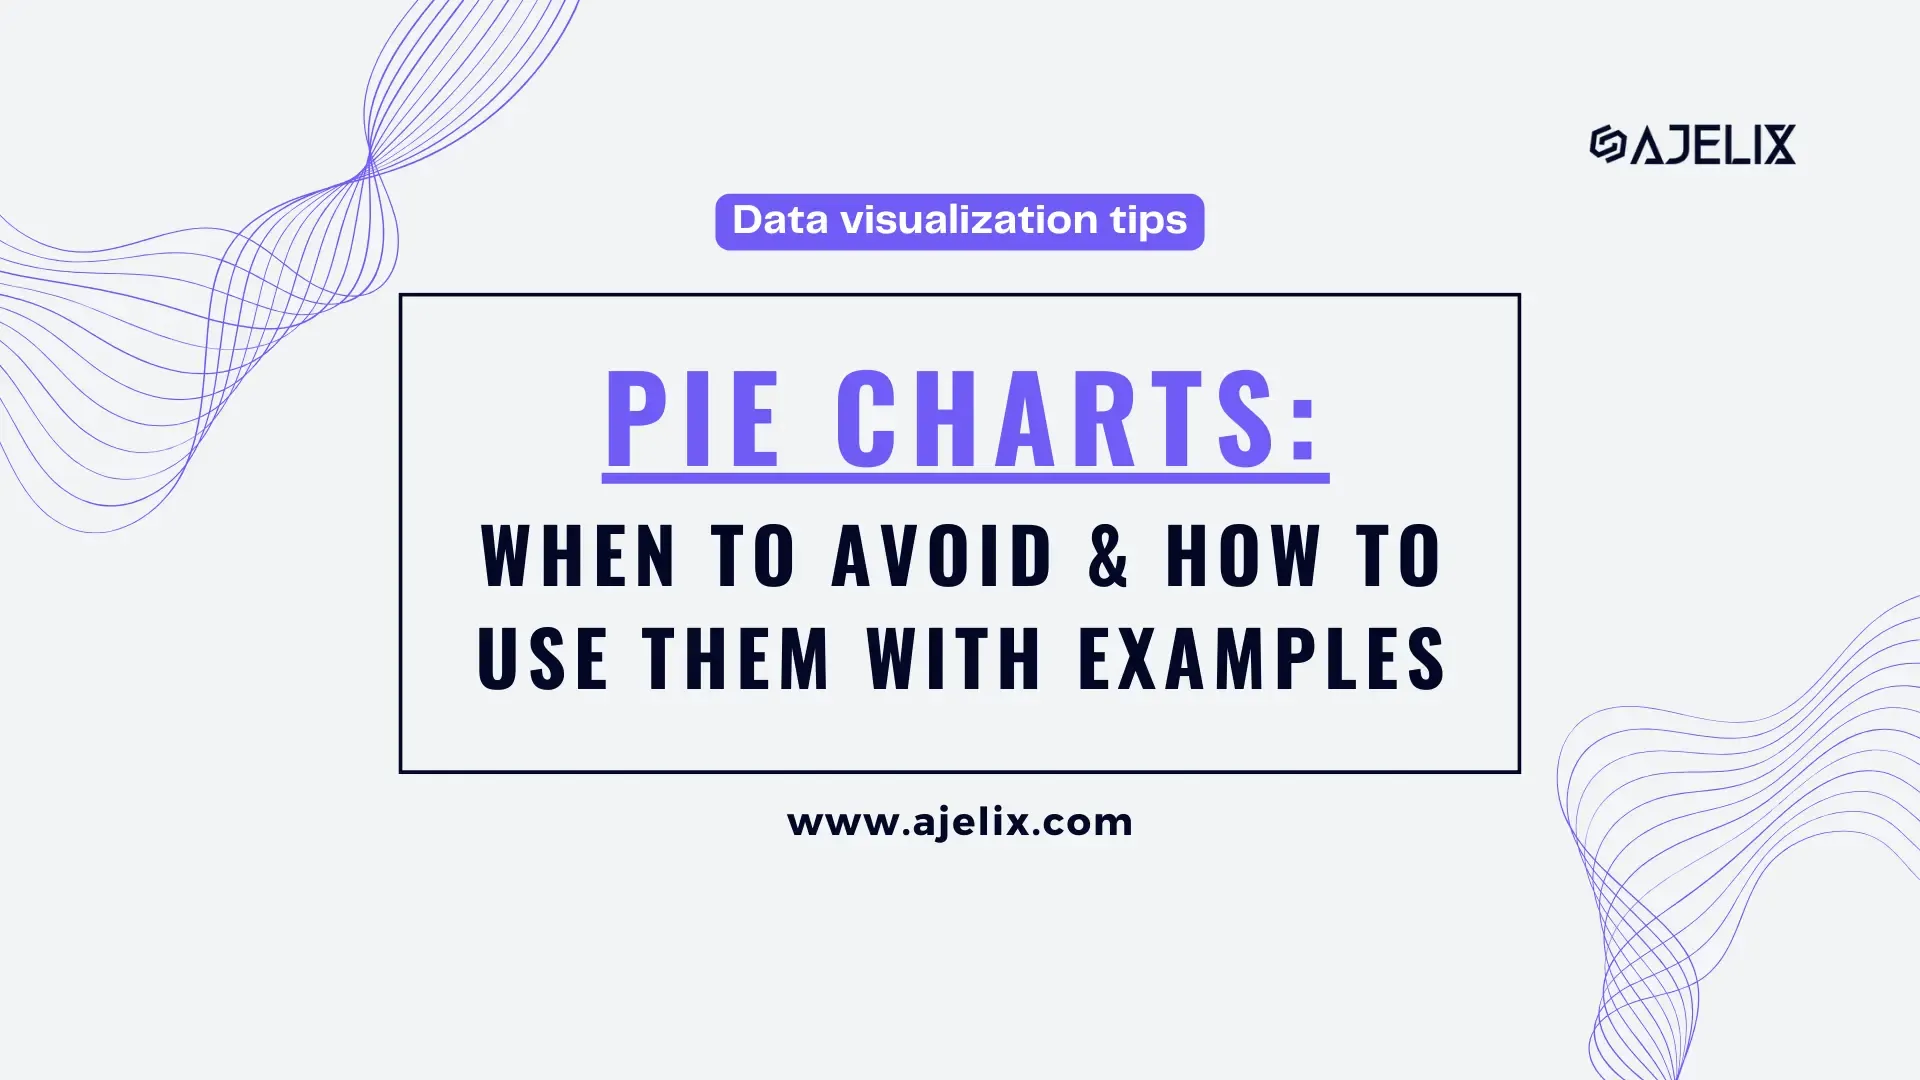 Pie charts: when to avoid and how to use them banner